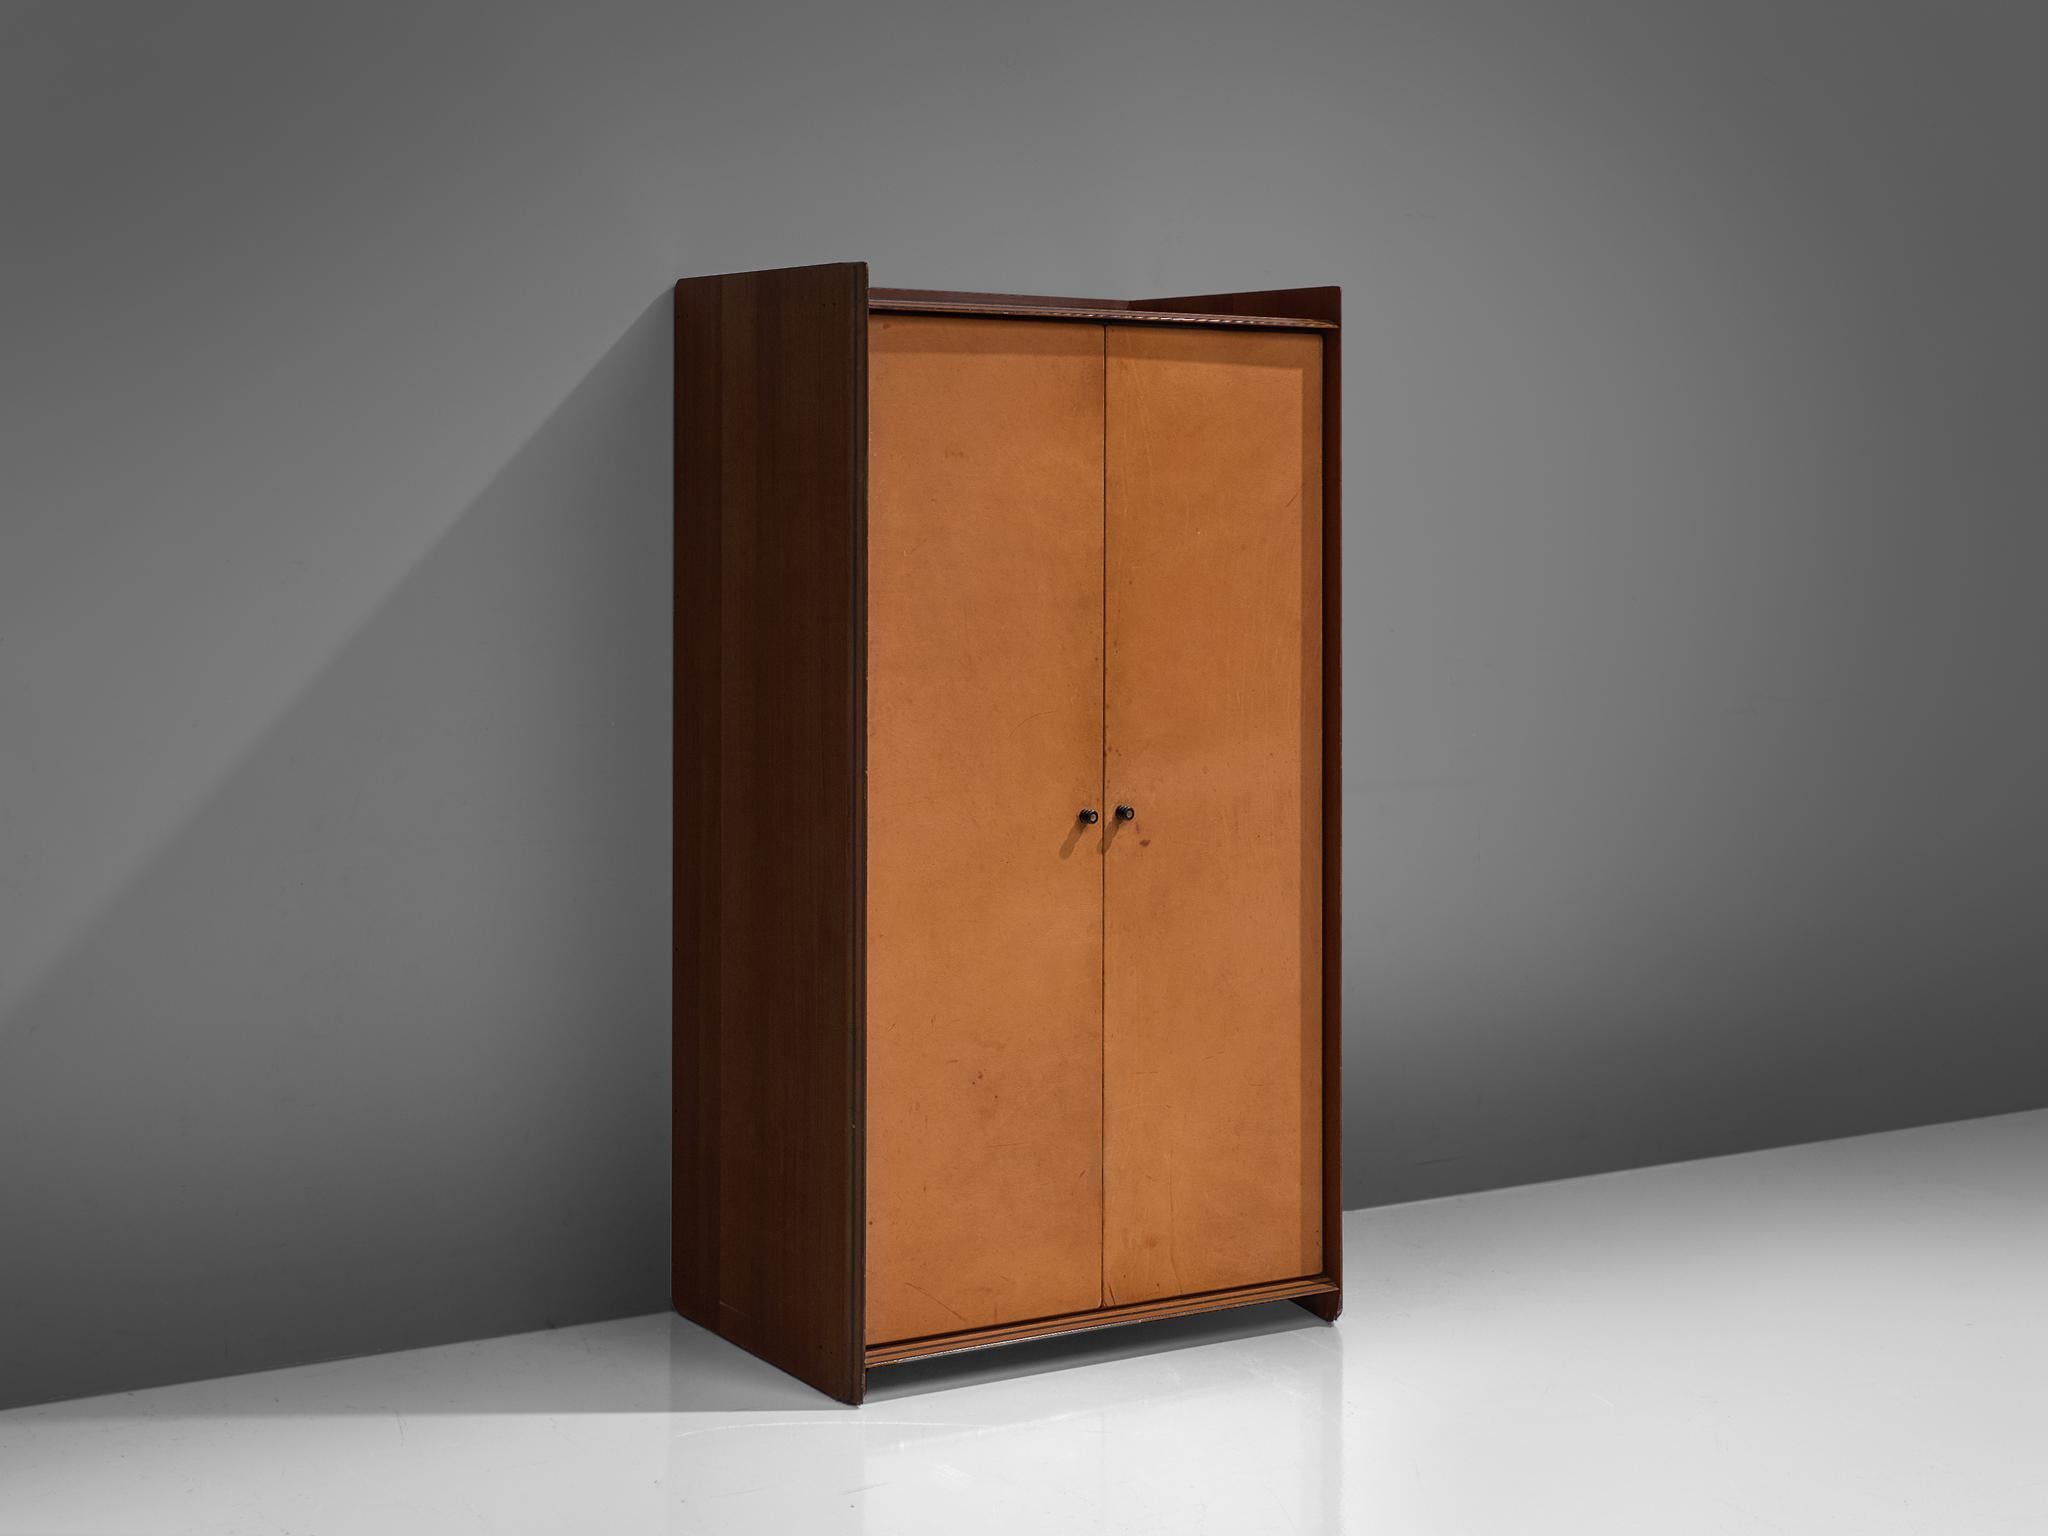 Afra & Tobia Scarpa, 'Artona' cabinet, walnut and cognac leather, Italy, circa 1975

This wardrobe with leather front is designed as part of the Artona line by The Artona line by the Scarpa duo was in fact the first line ever produced by Maxalto,